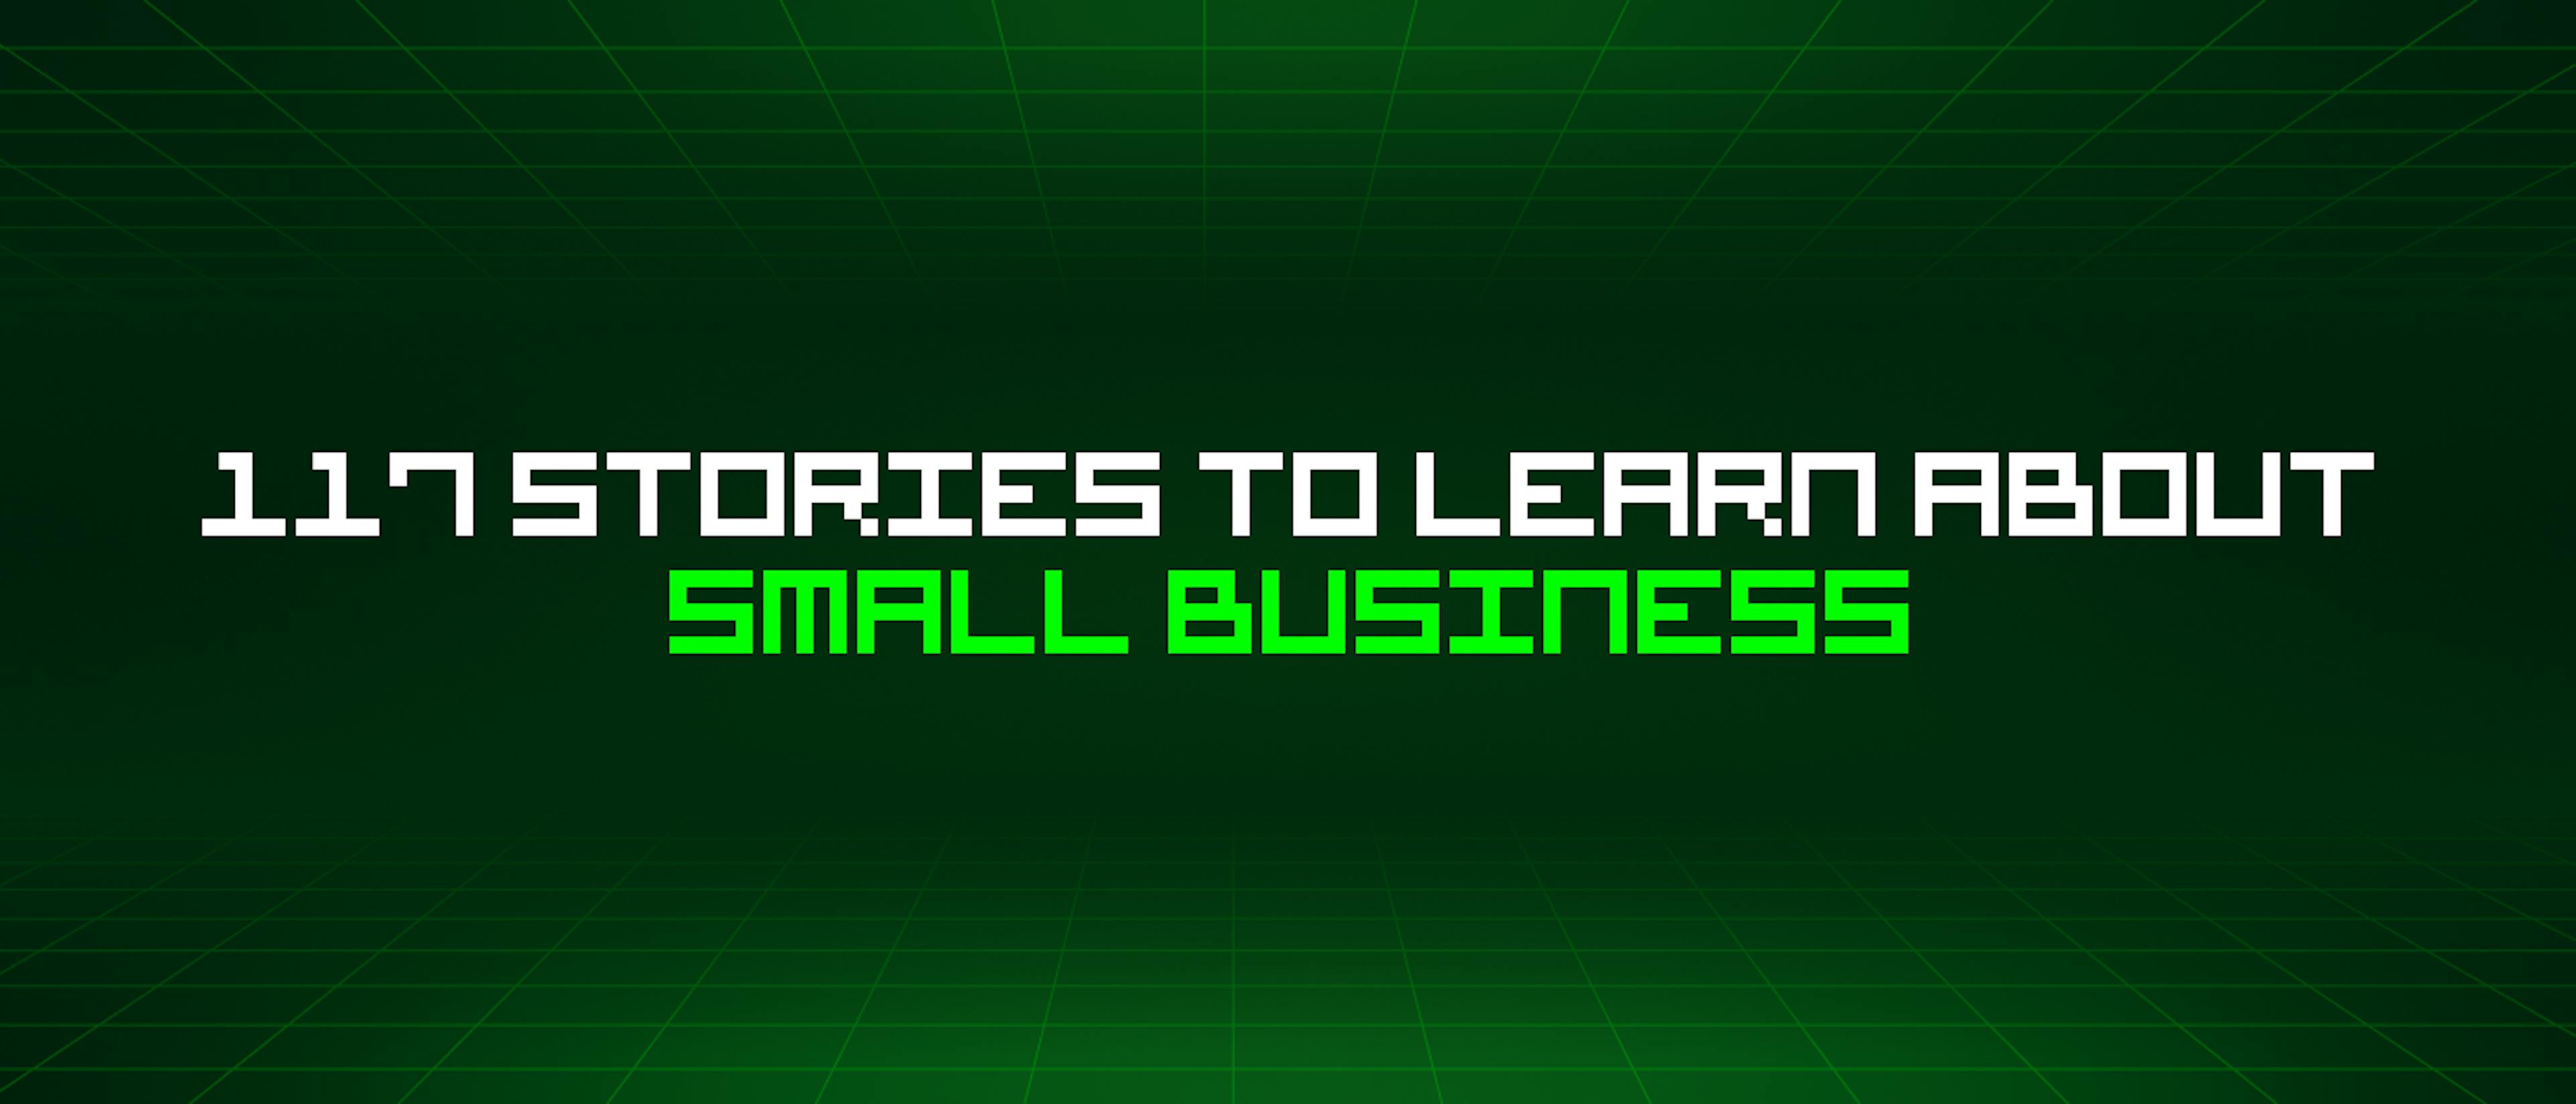 featured image - 117 Stories To Learn About Small Business